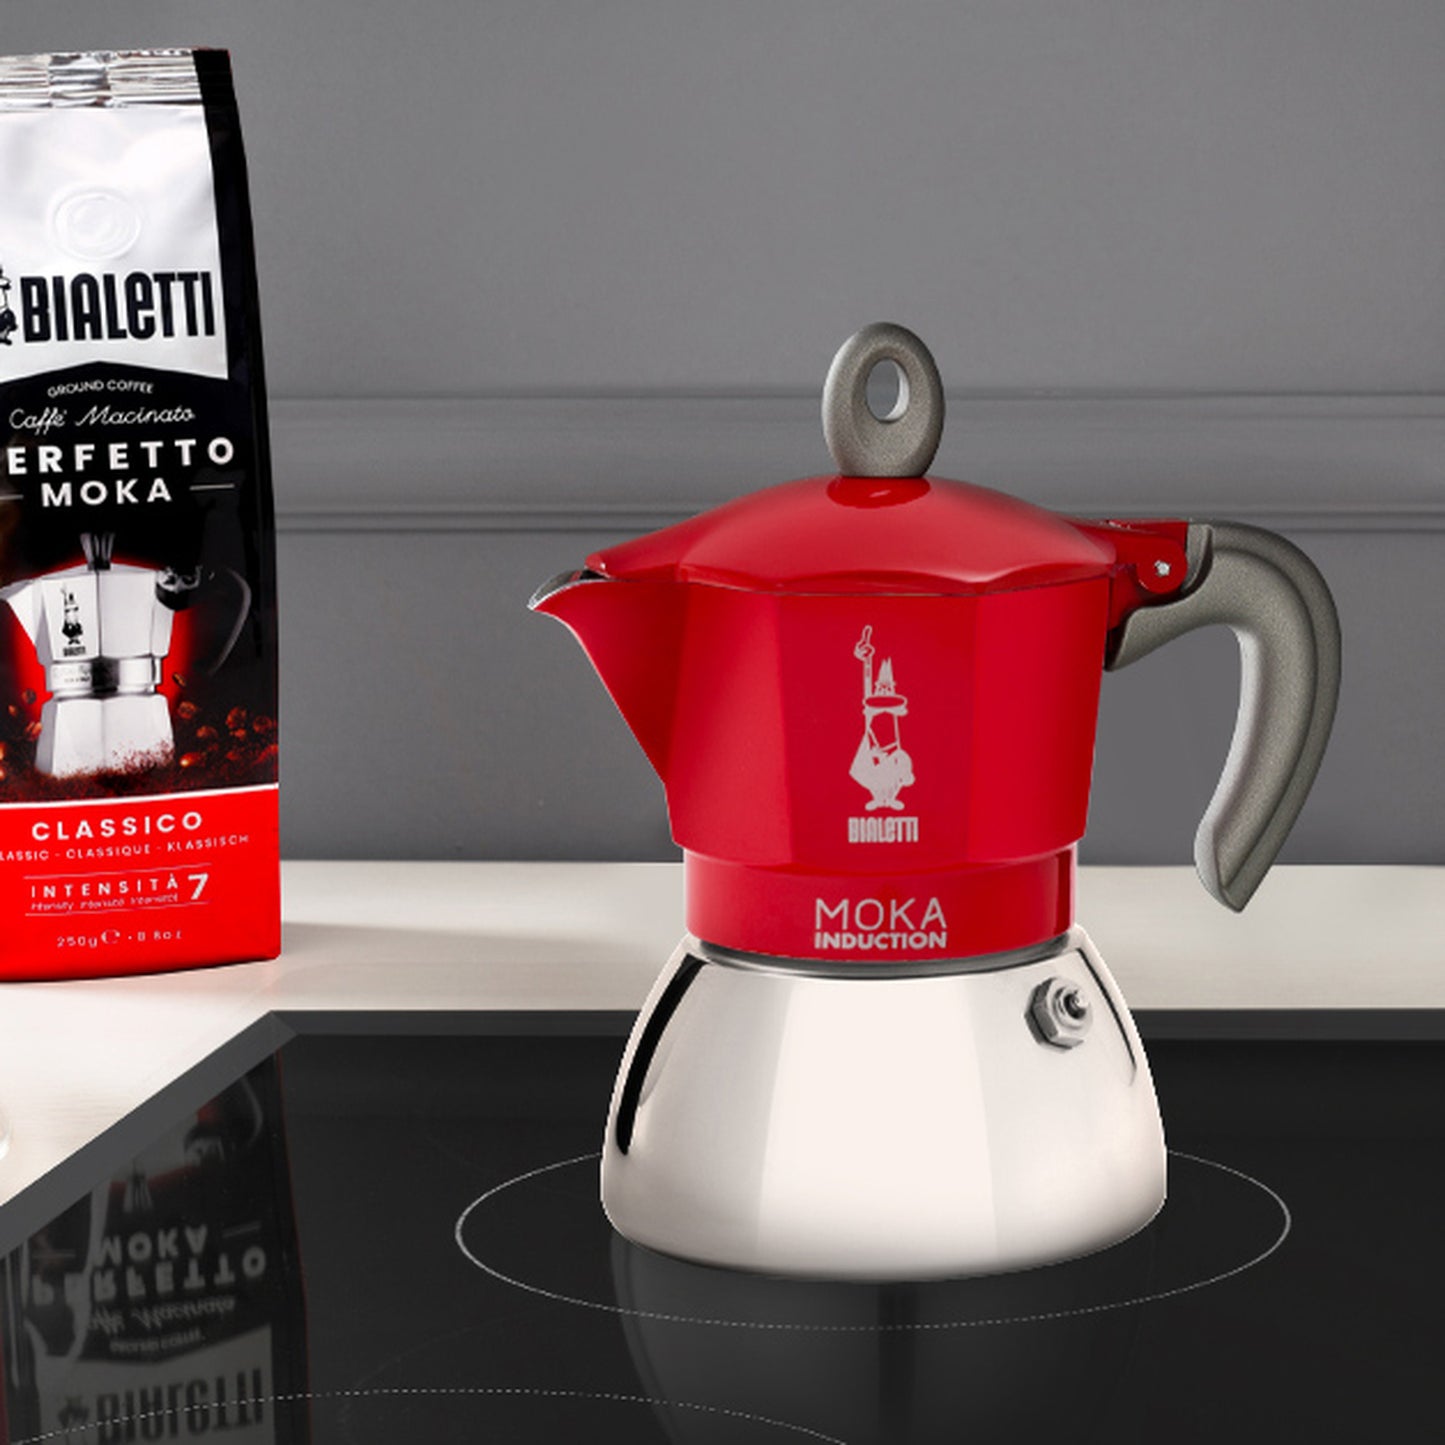 Bialetti Moka Induction - 2 person - red